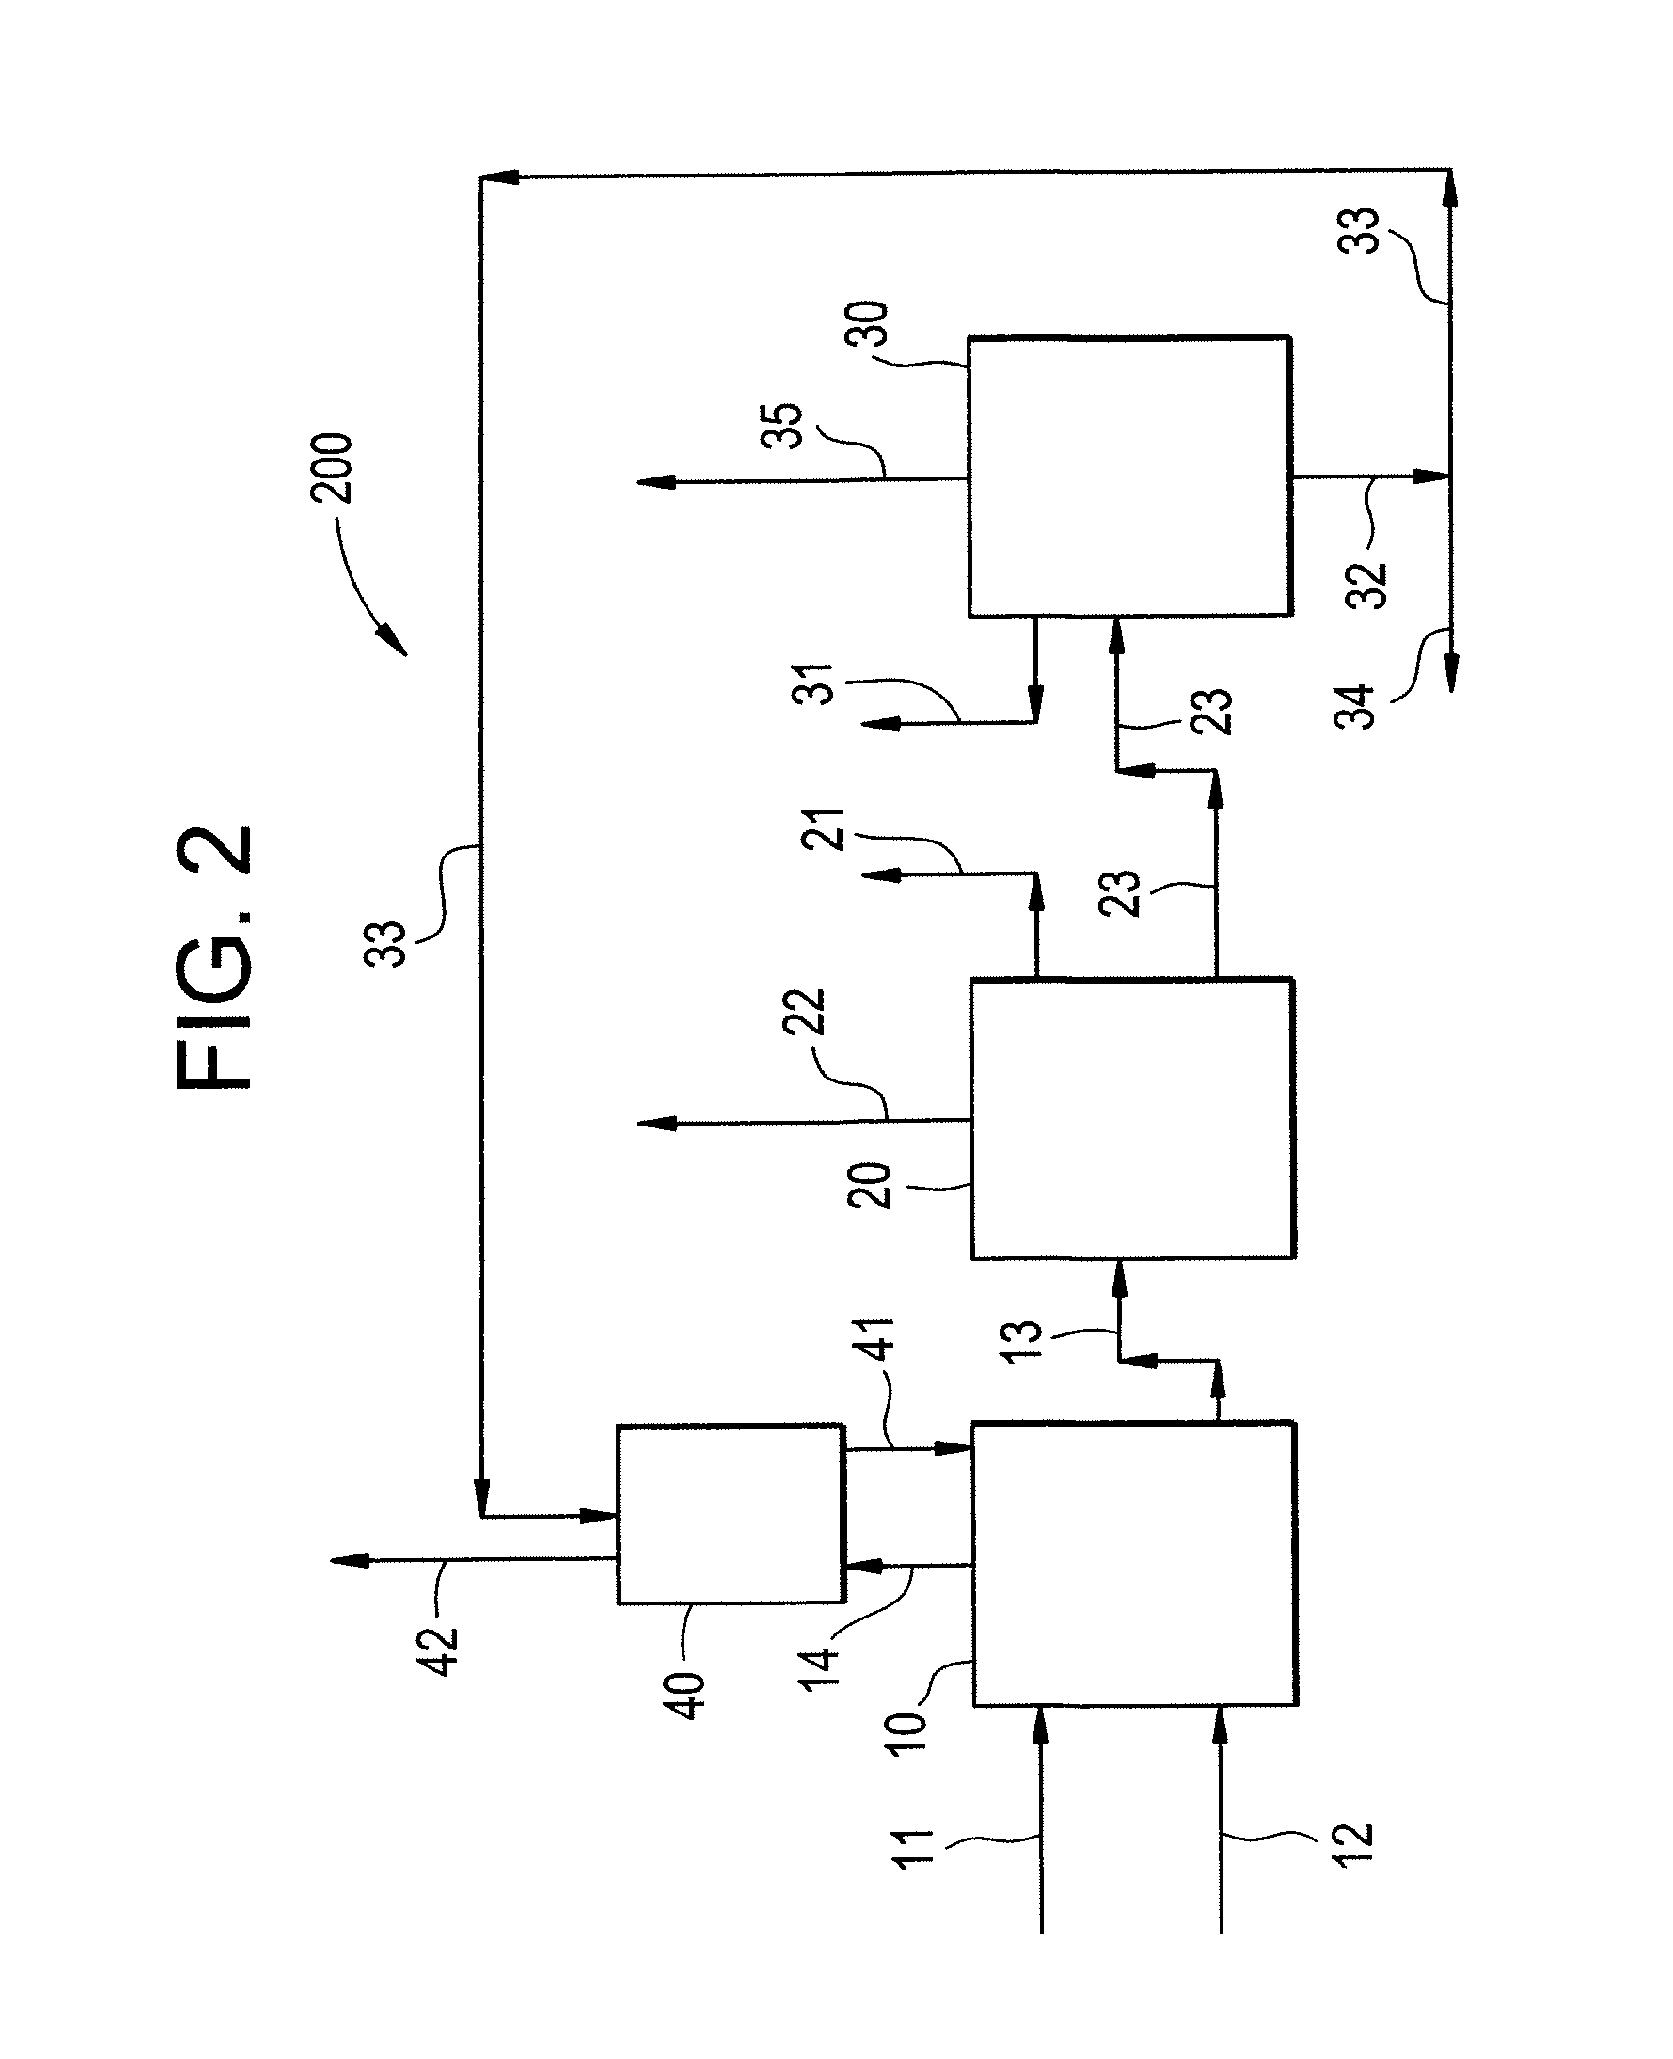 Multi-stage process and apparatus for recovering dichlorohydrins